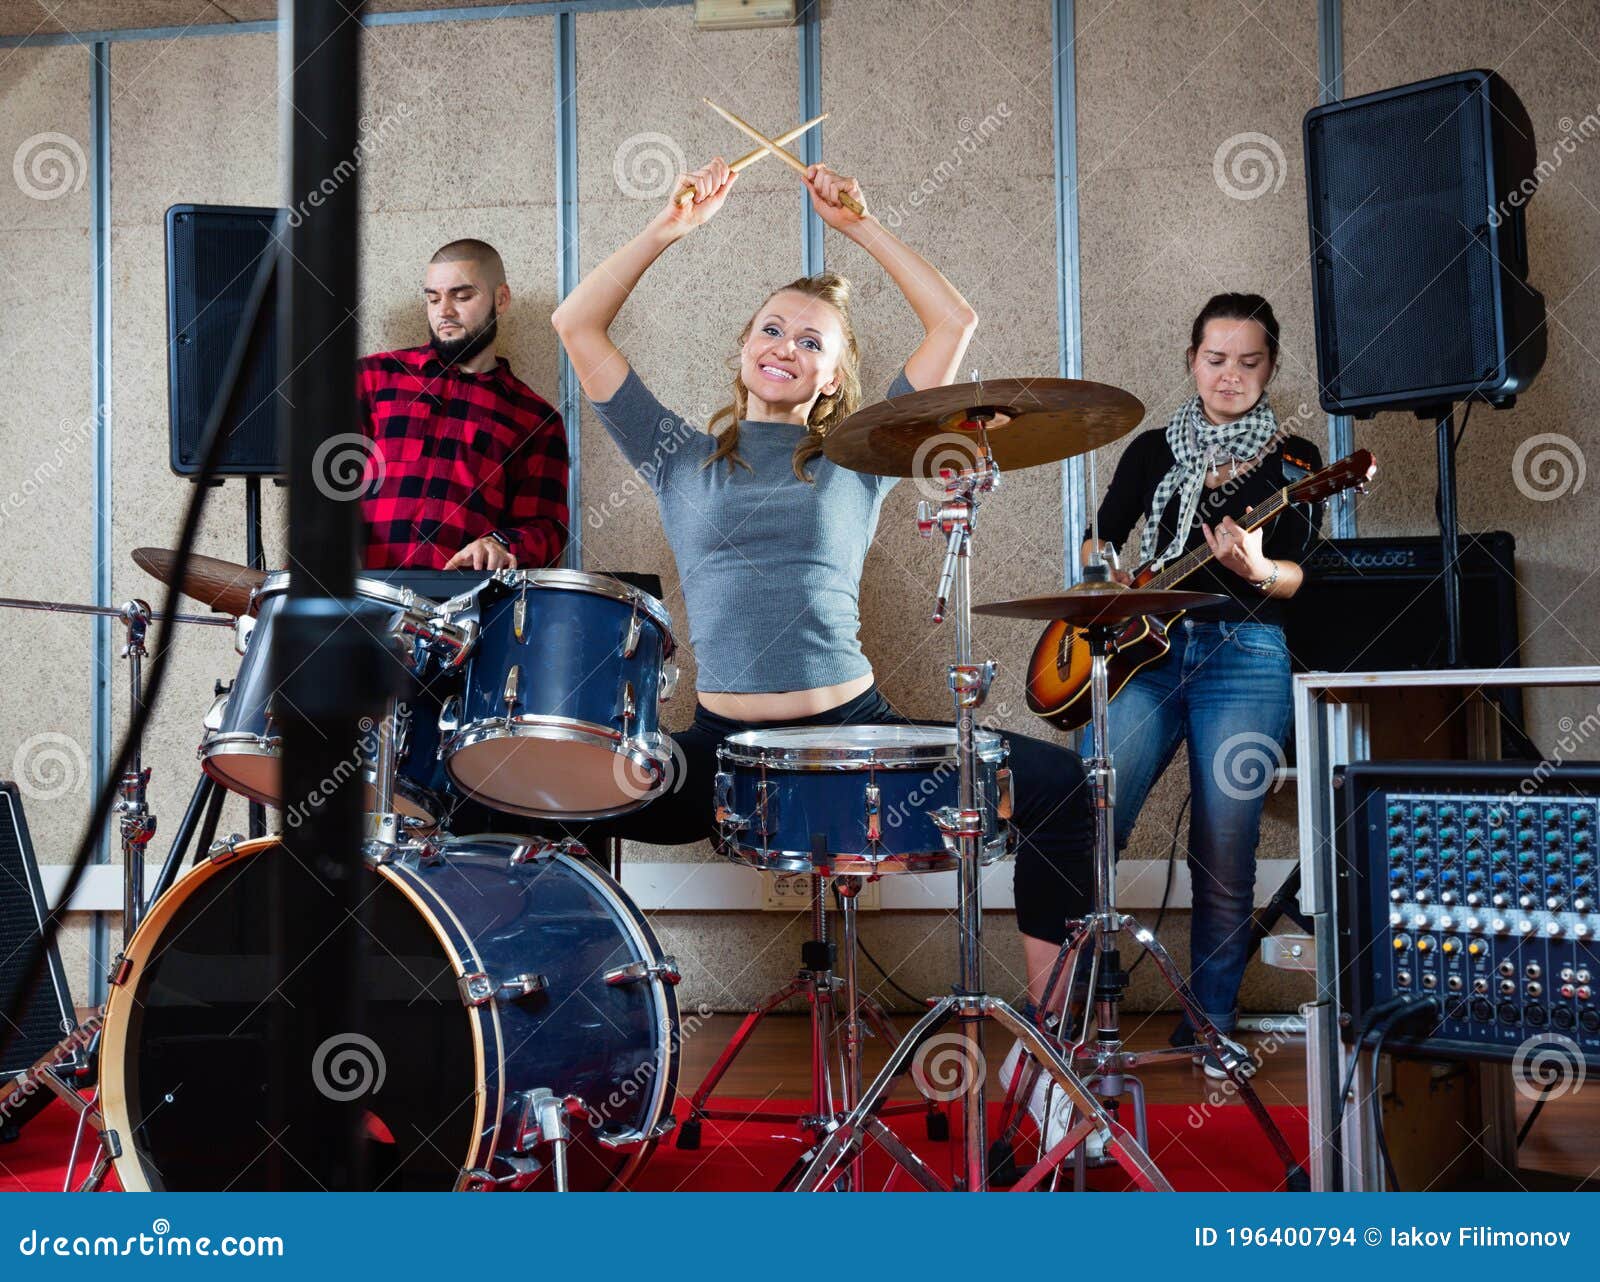 passionate emotional female drummer with her bandmates practicing in rehearsal room